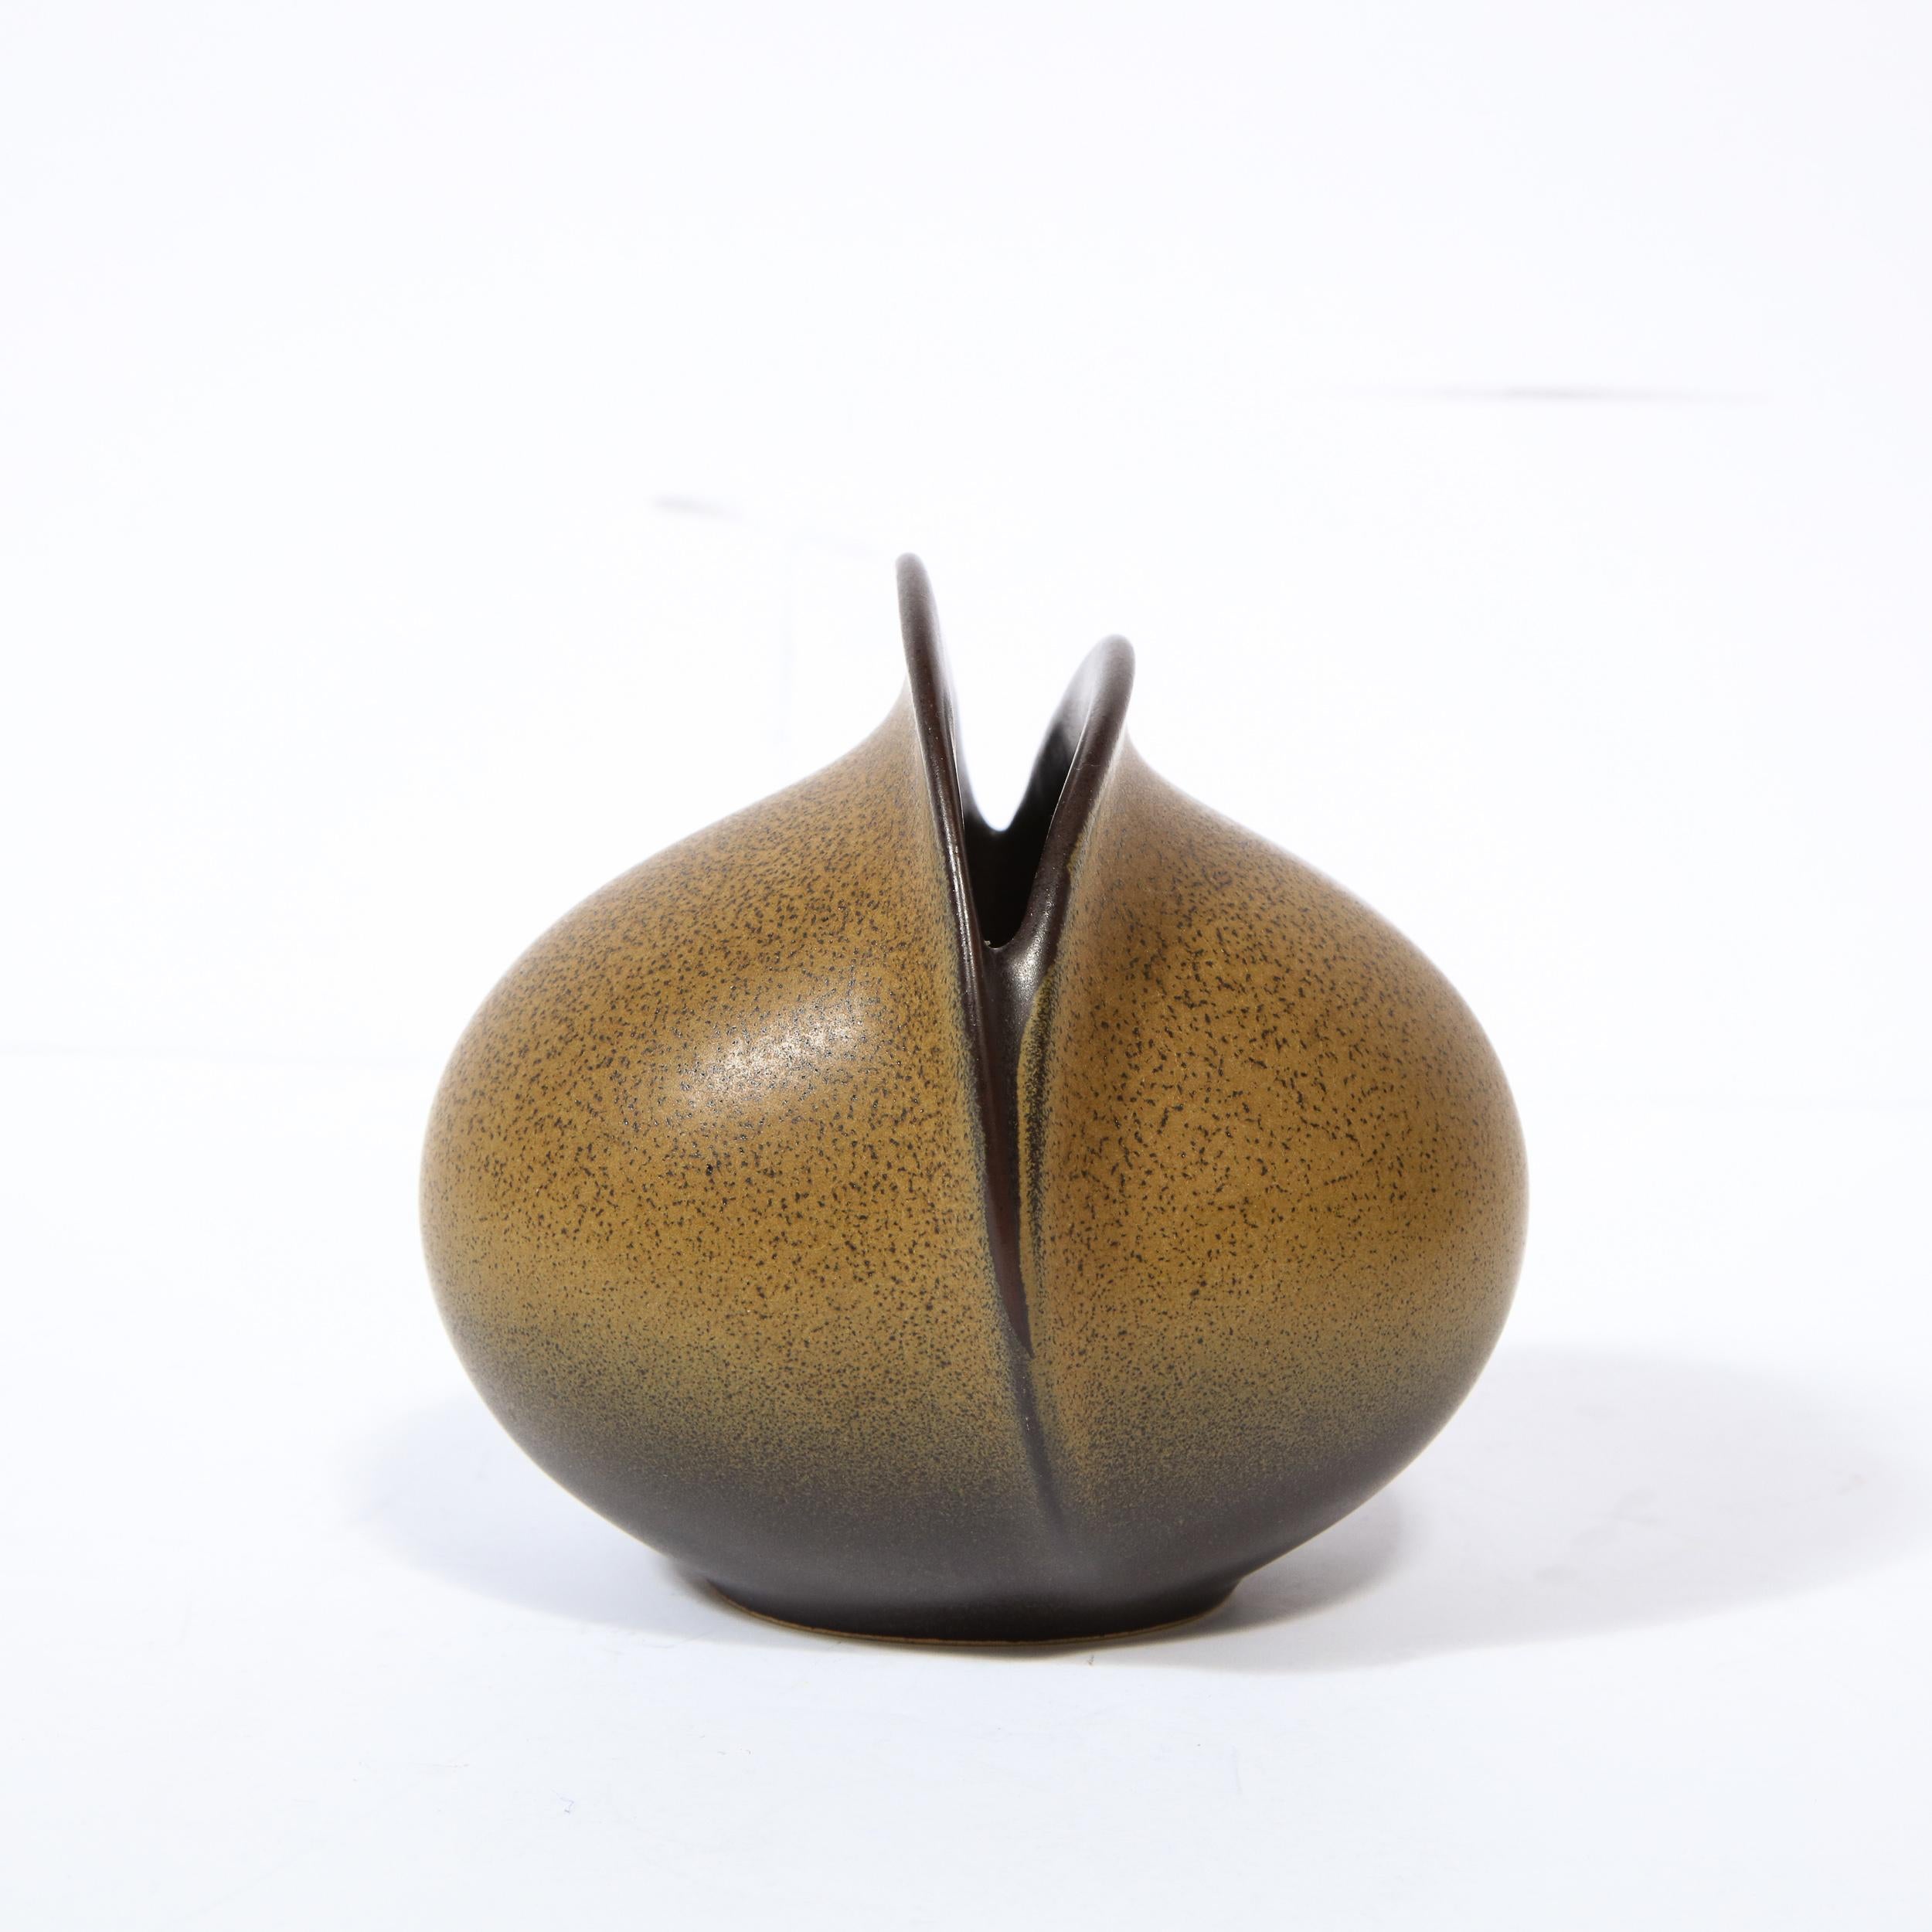 This refined and sculptural vase was designed in Germany by the esteemed maker Rosenthal circa 1960. It offers a spherical form with an ovoid slit. The exterior of the piece is tawny with umber detailing. The interior of the piece is also painted in